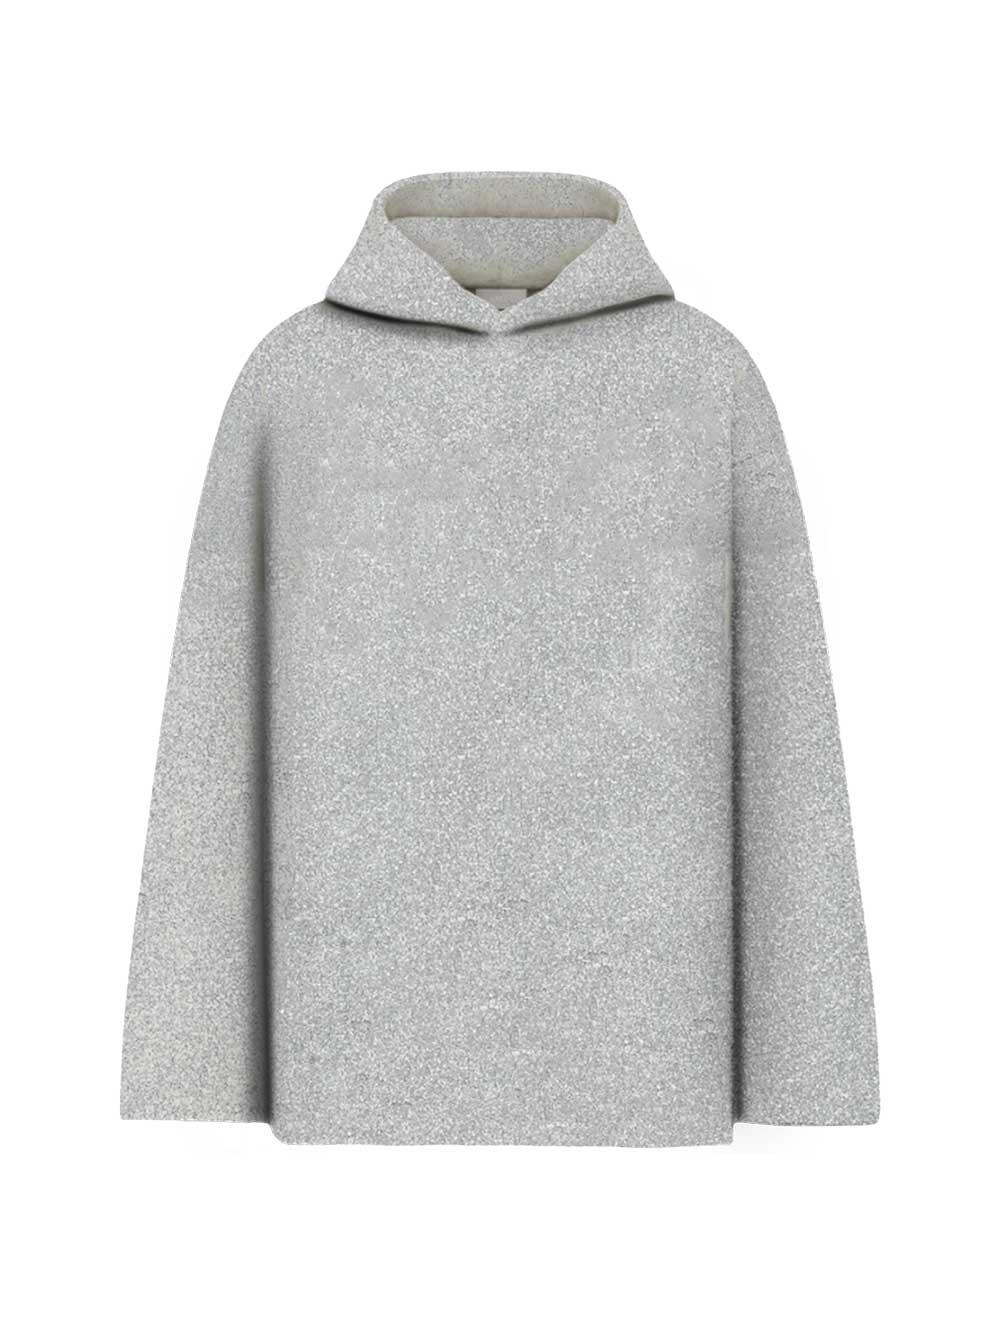 Tapestry Hoodie - Constantly Create Shop